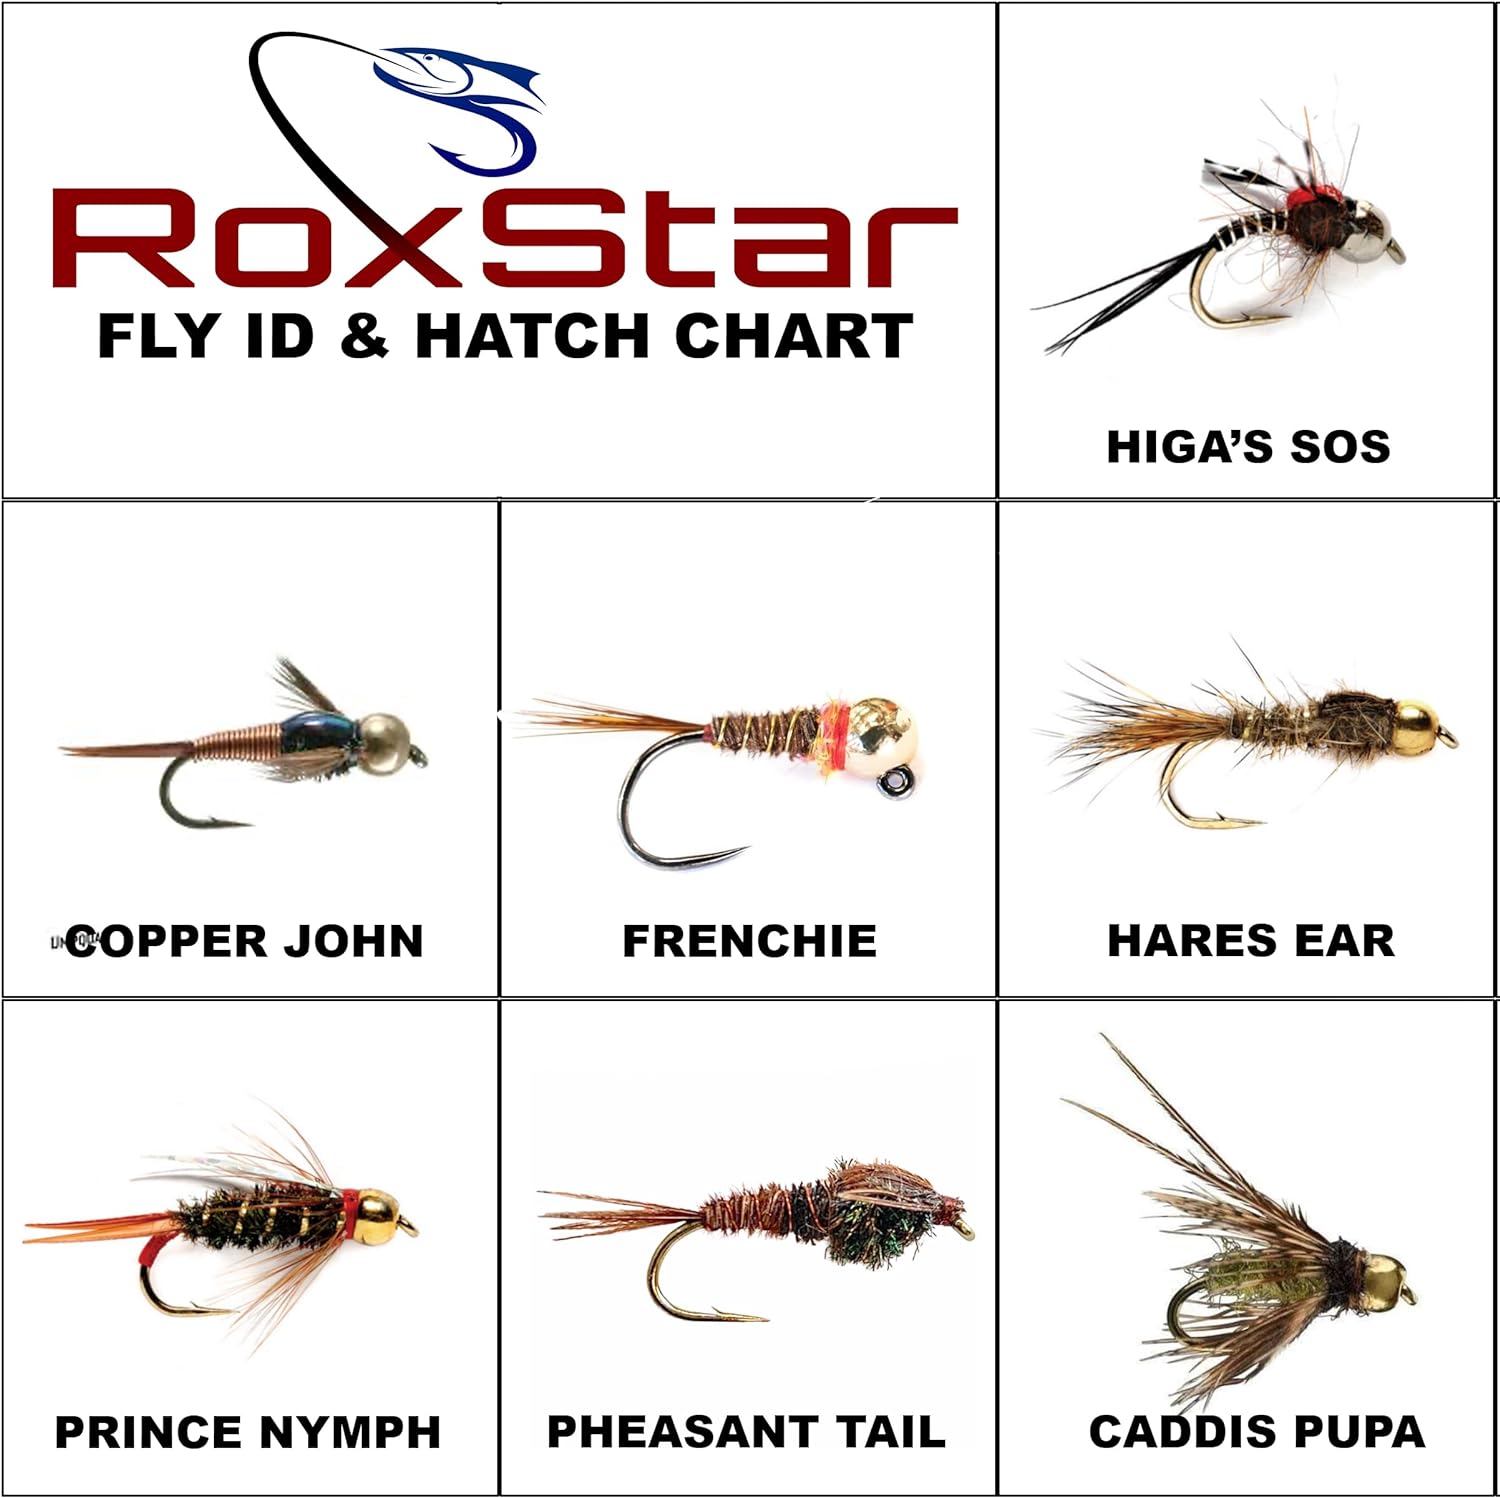 RoxStar Fly Shop Nymph Fly Hatch Pack Review